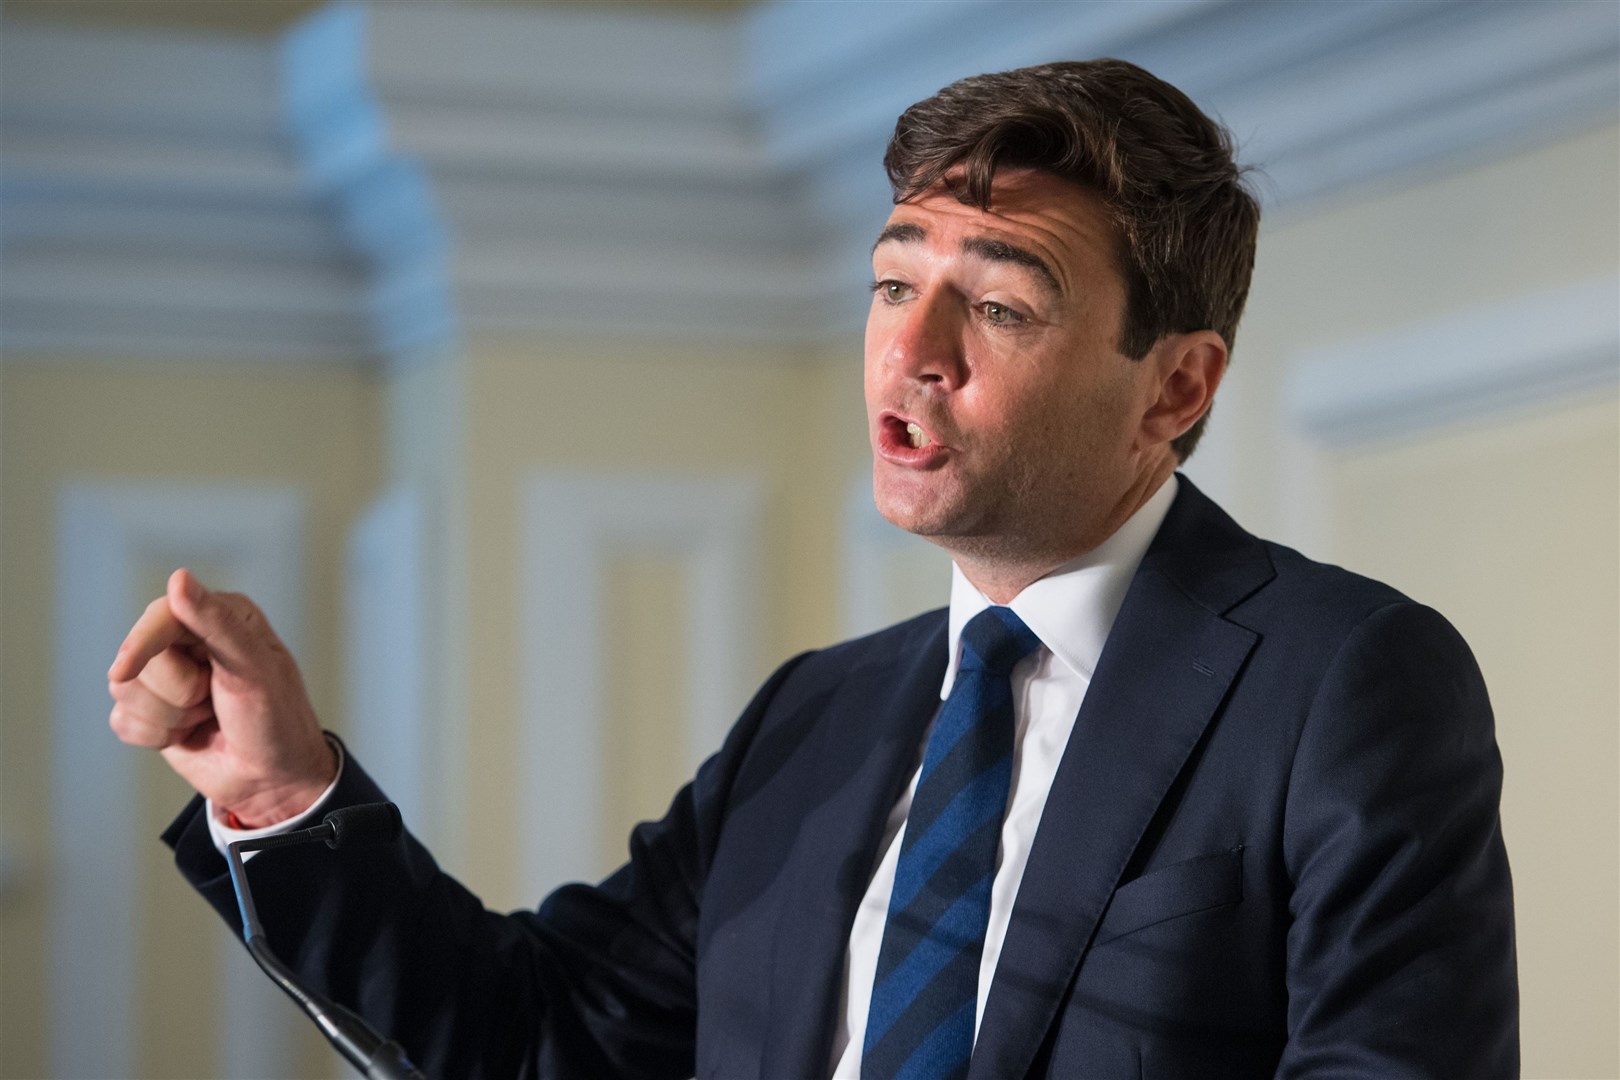 Andy Burnham has said it was ‘disappointing’ that an offer of a hardship fund was withdrawn (Dominic Lipinski/PA)